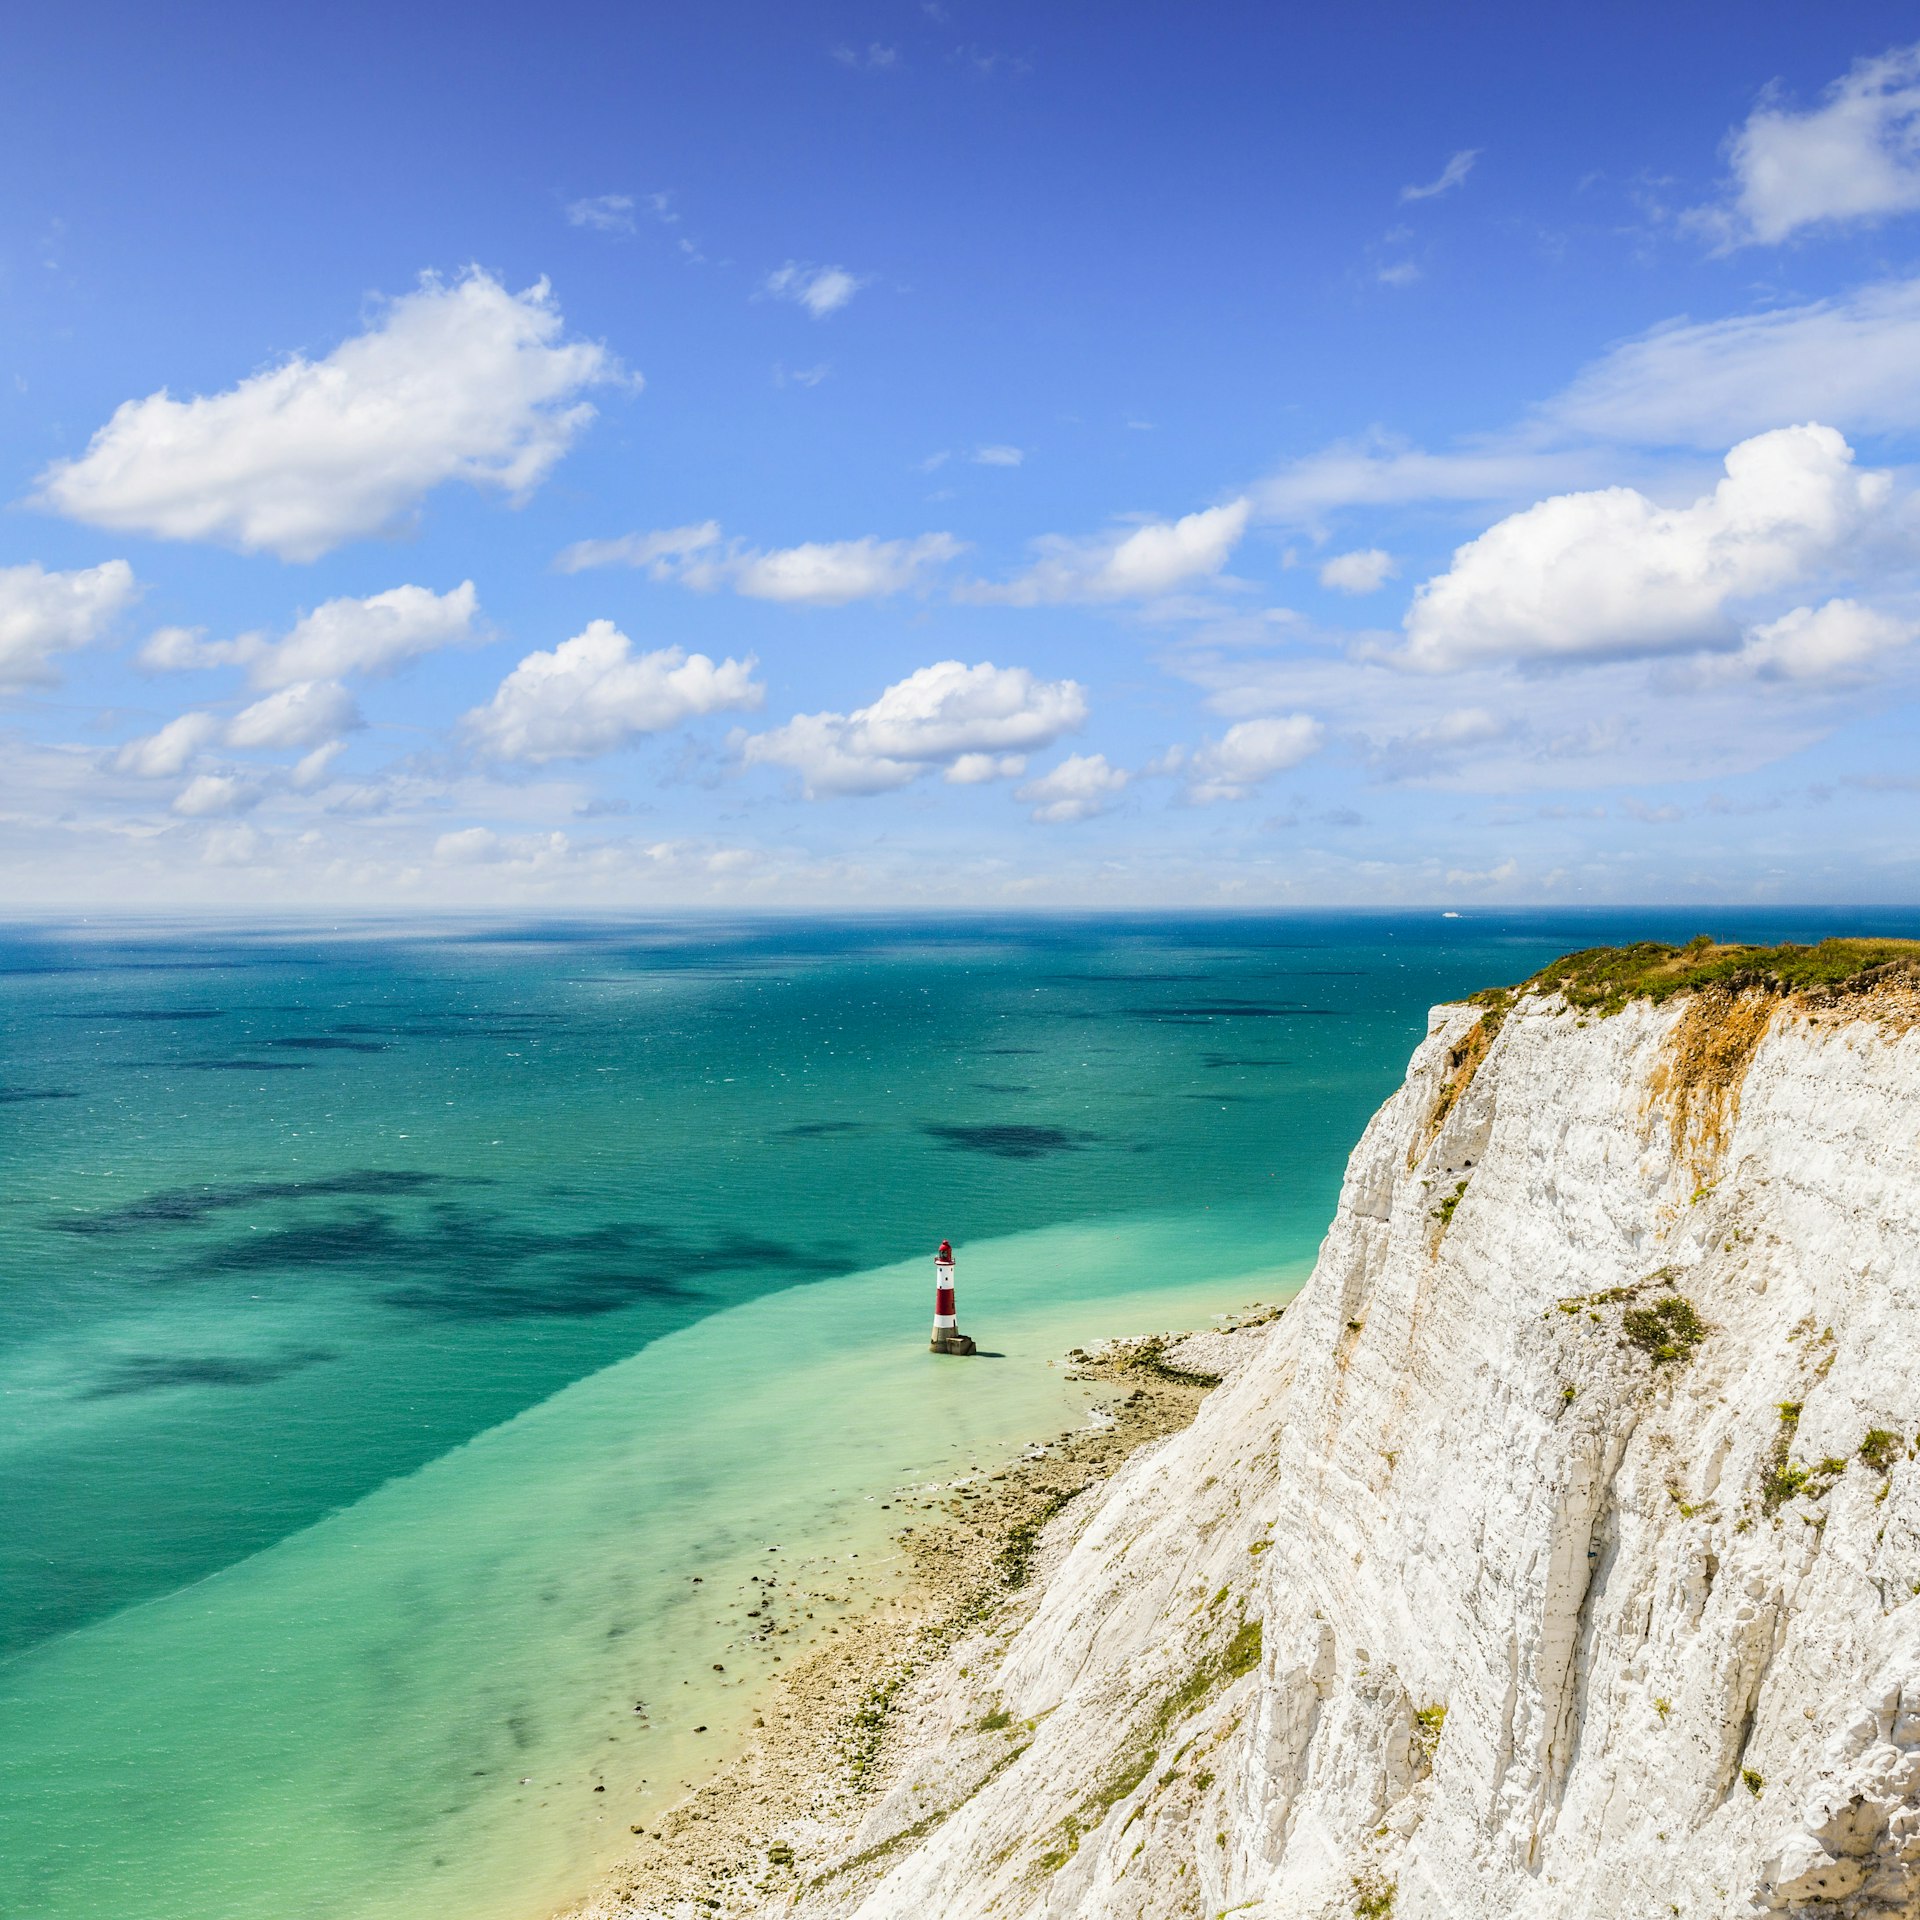 A white cliff on the edge of a turquoise sea. A red-and-white striped lighthouse stands in the shallows